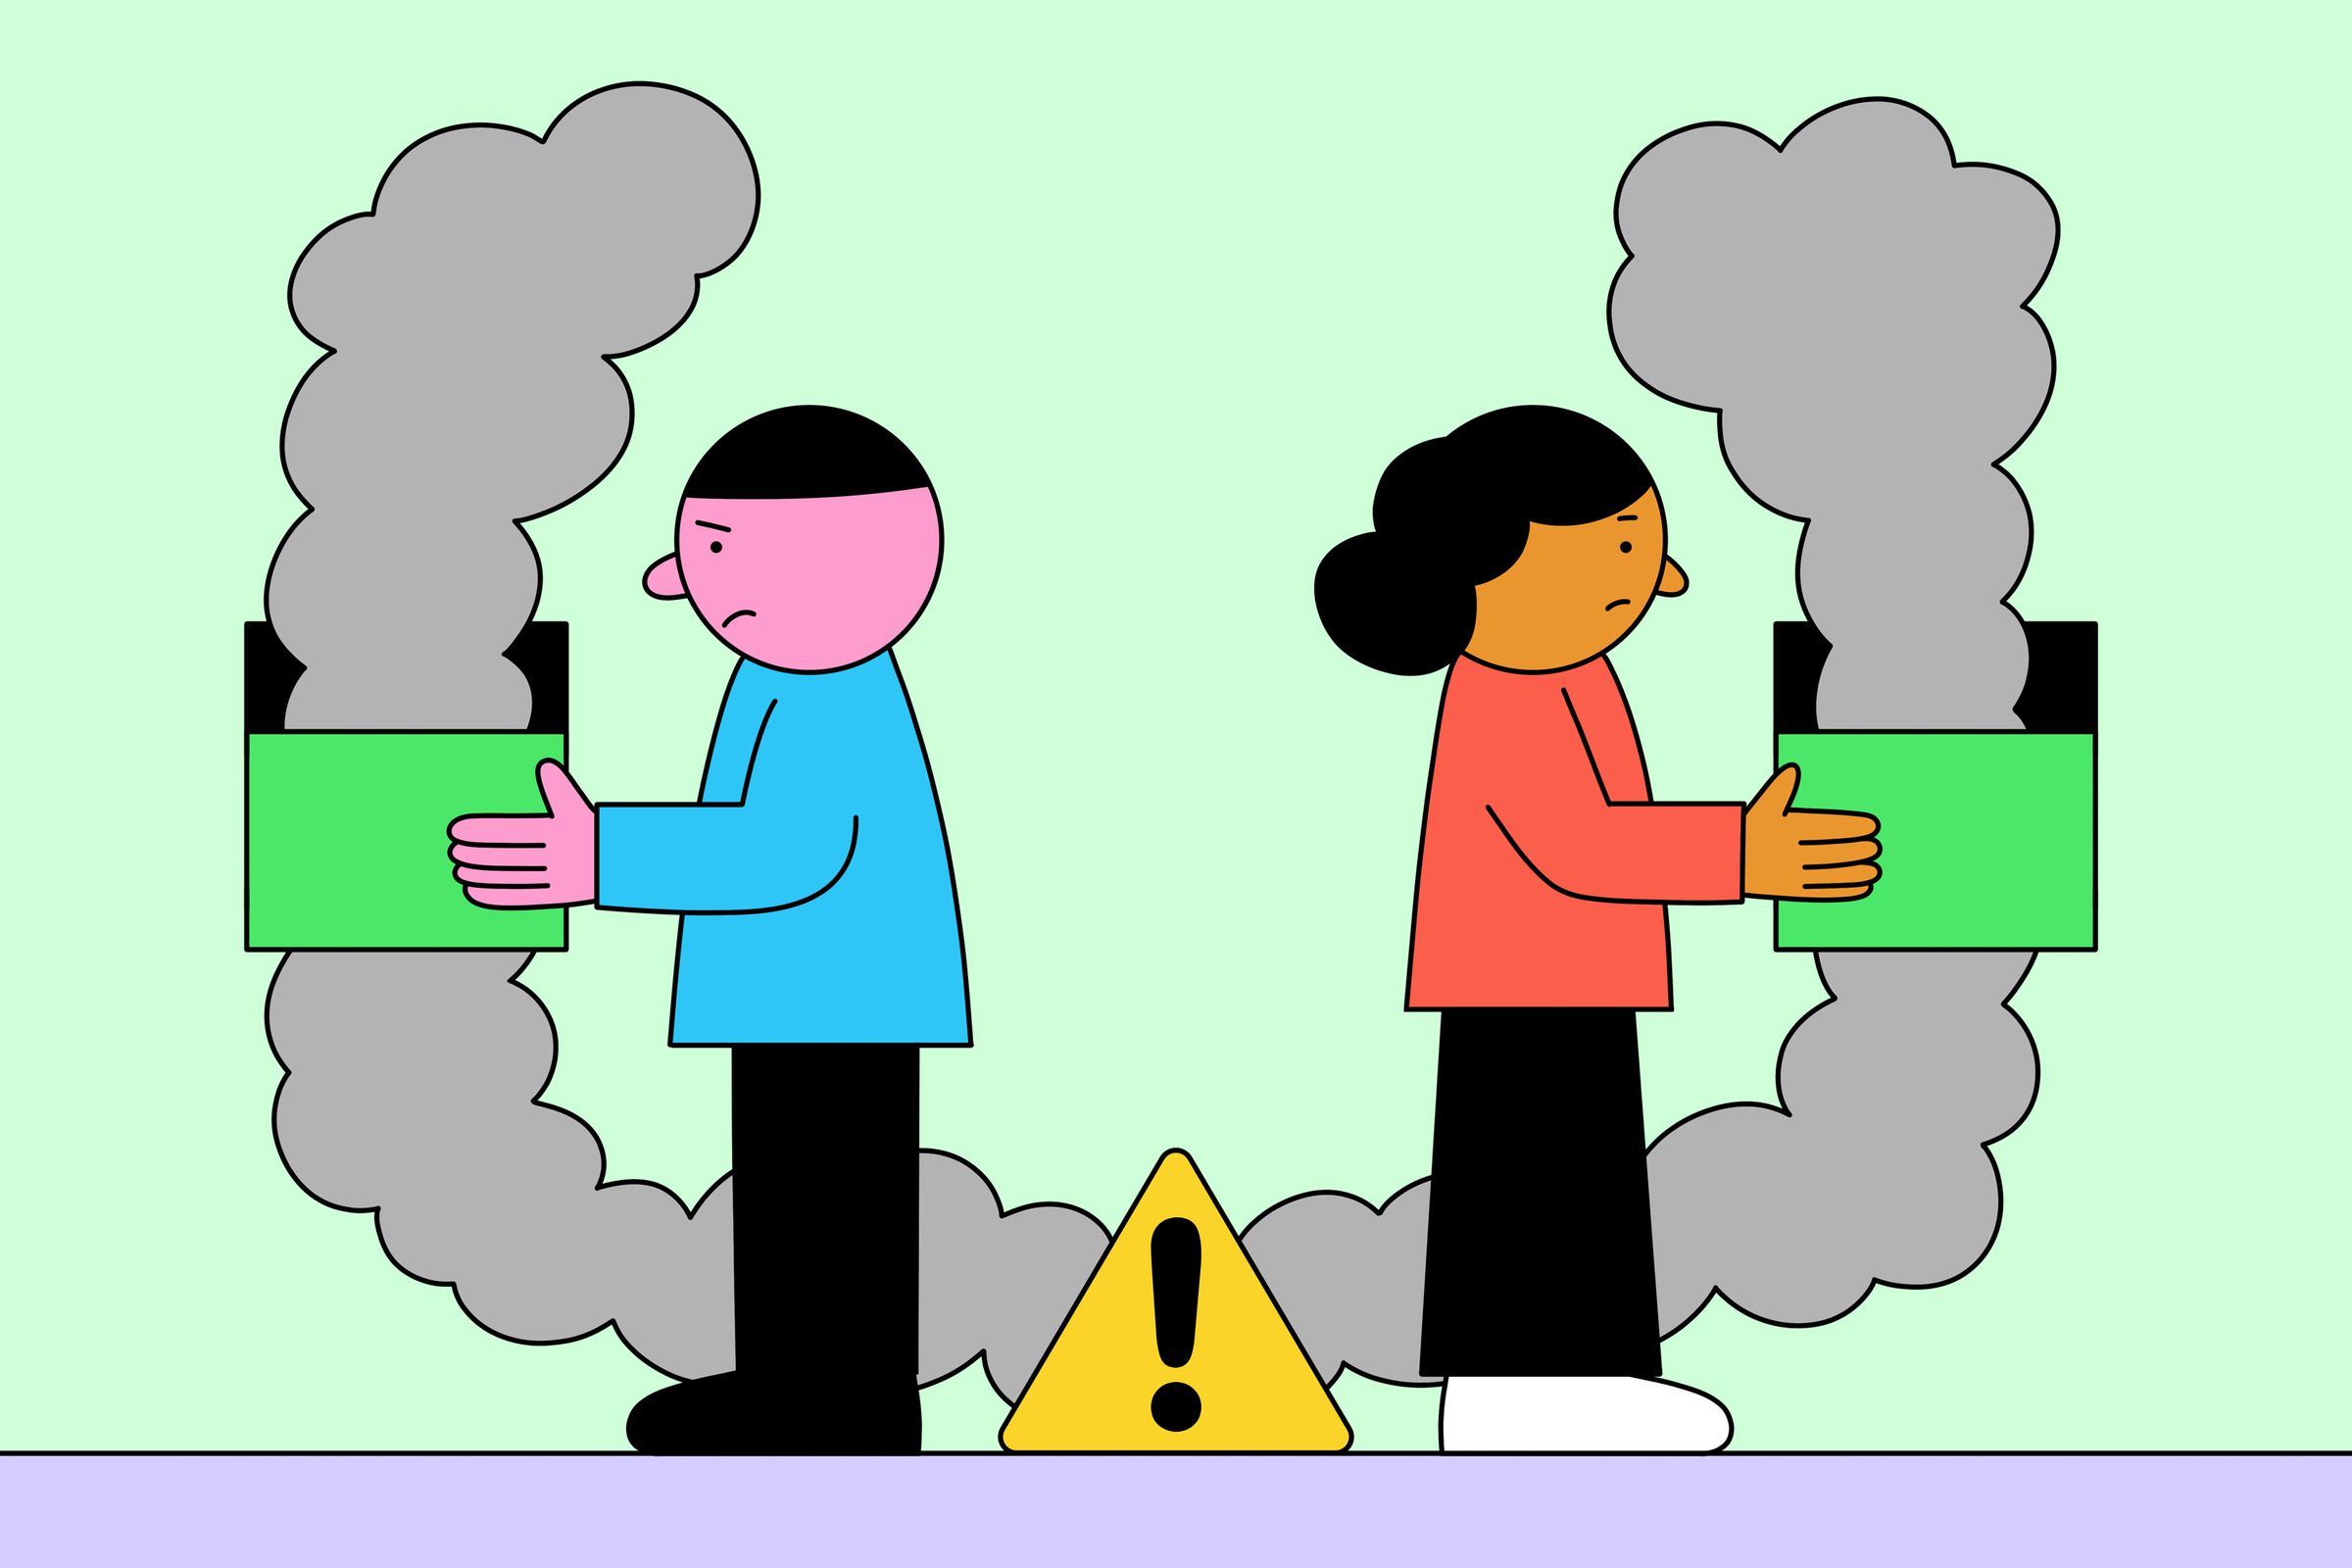 Two cartoon figures face away from each other holding matching boxes emitting smoke, which comes from a common source behind them.